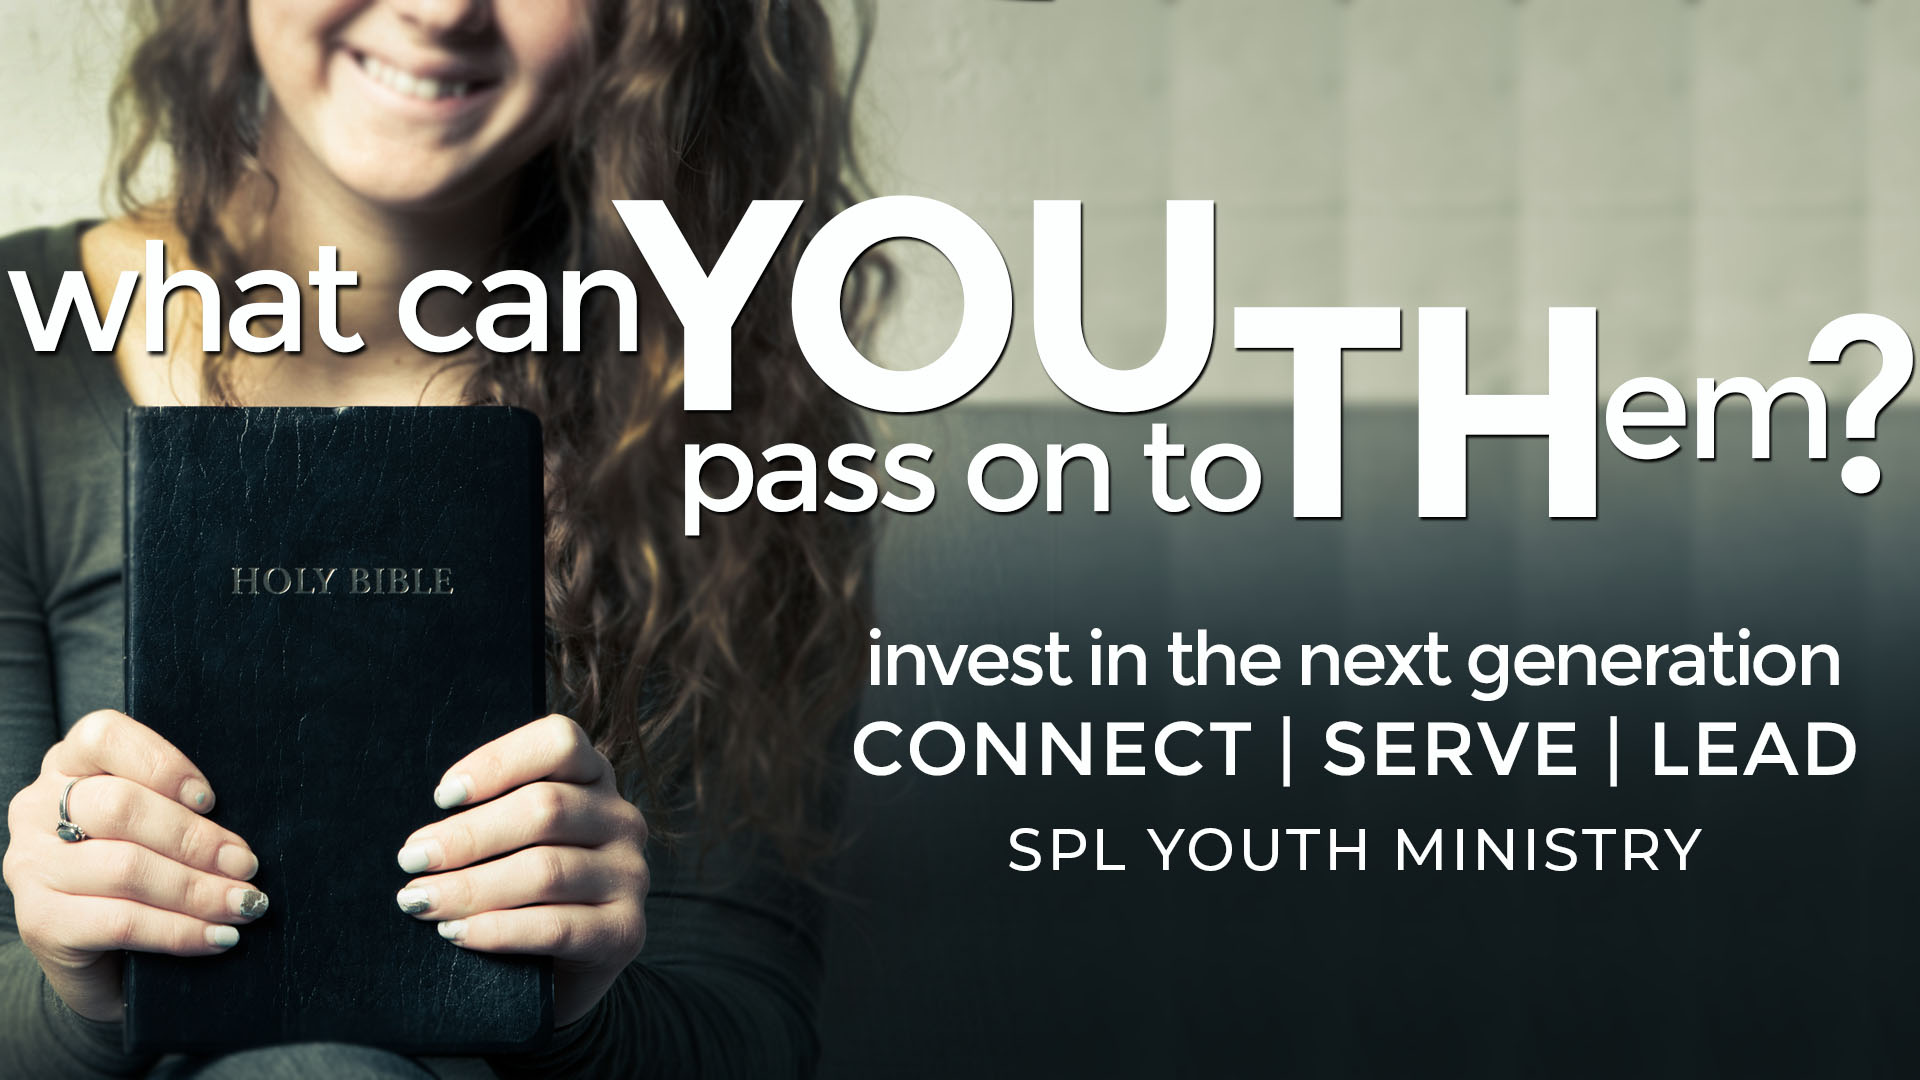 Ready to Impact the Next Generation?